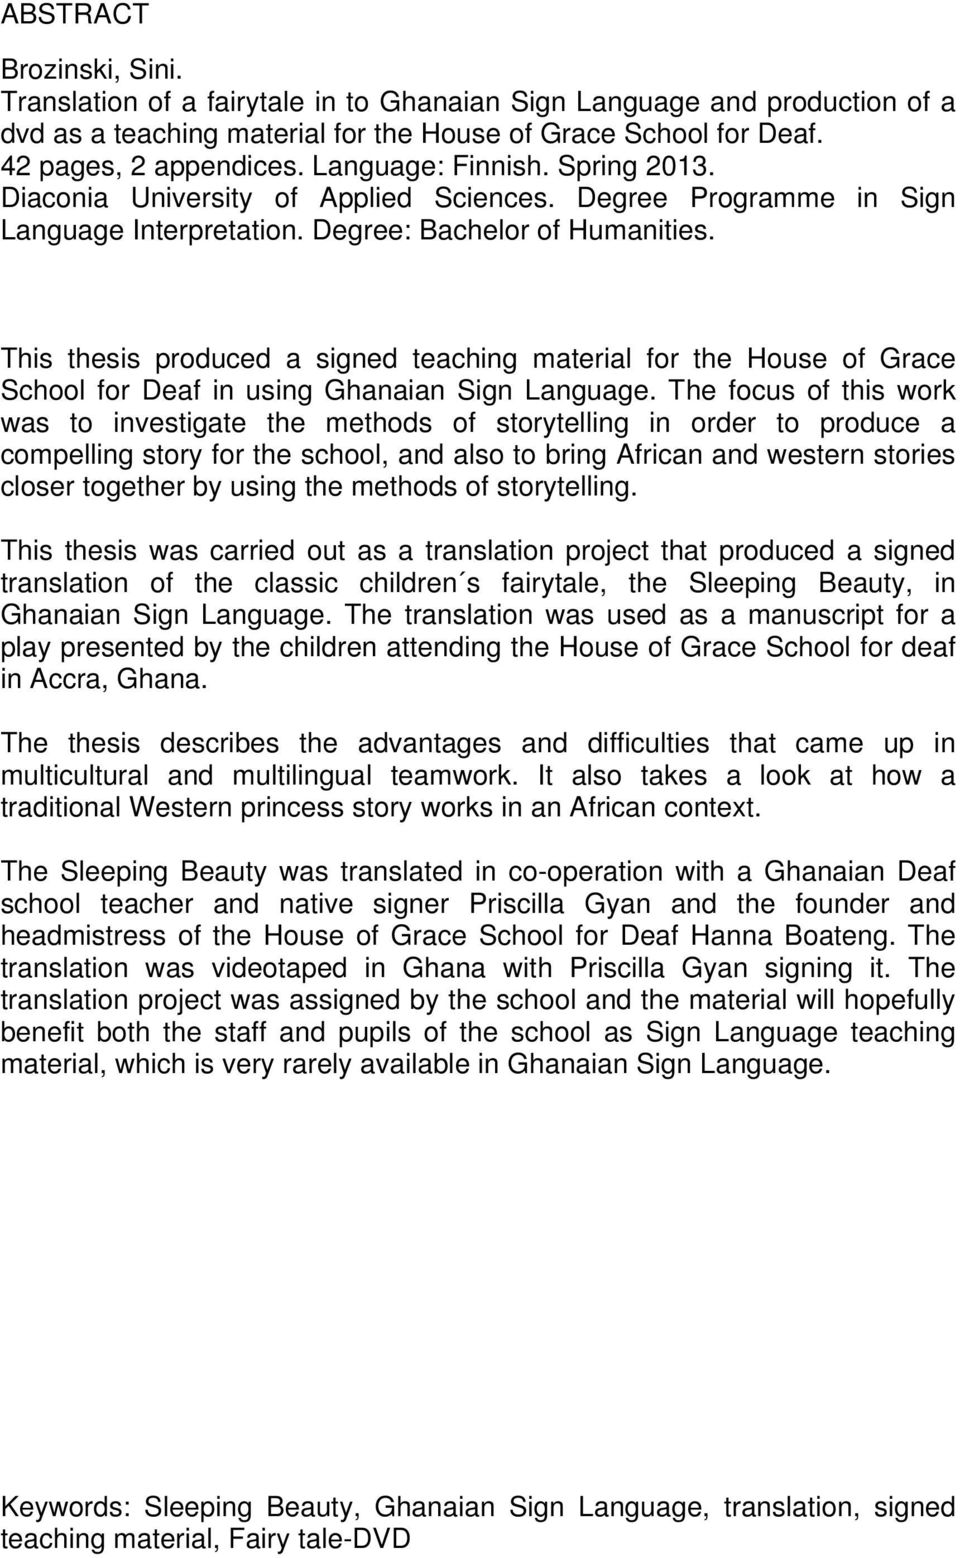 This thesis produced a signed teaching material for the House of Grace School for Deaf in using Ghanaian Sign Language.